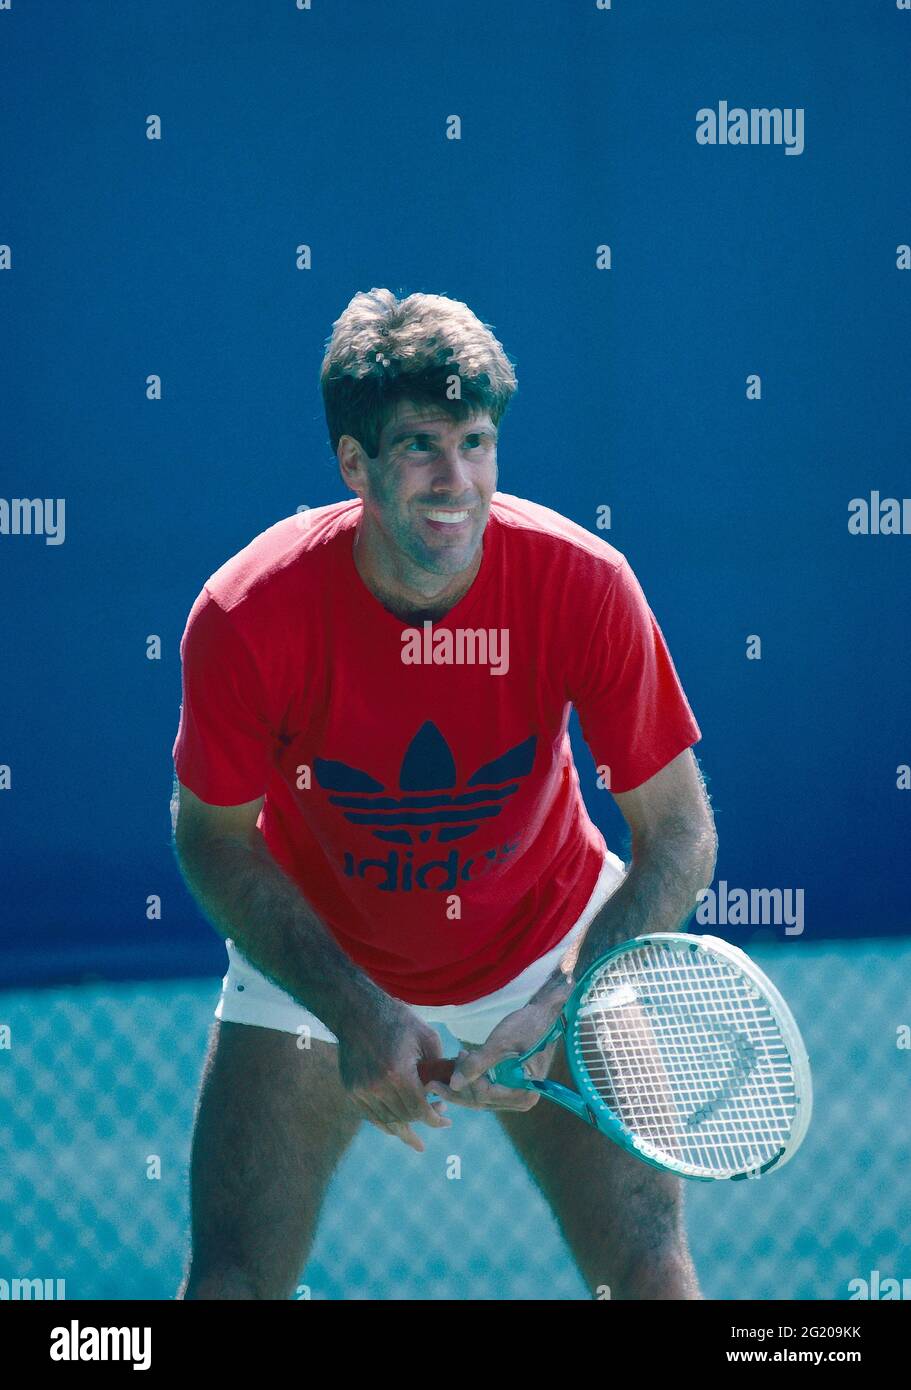 American tennis player Tim Mayotte, 1980s Stock Photo